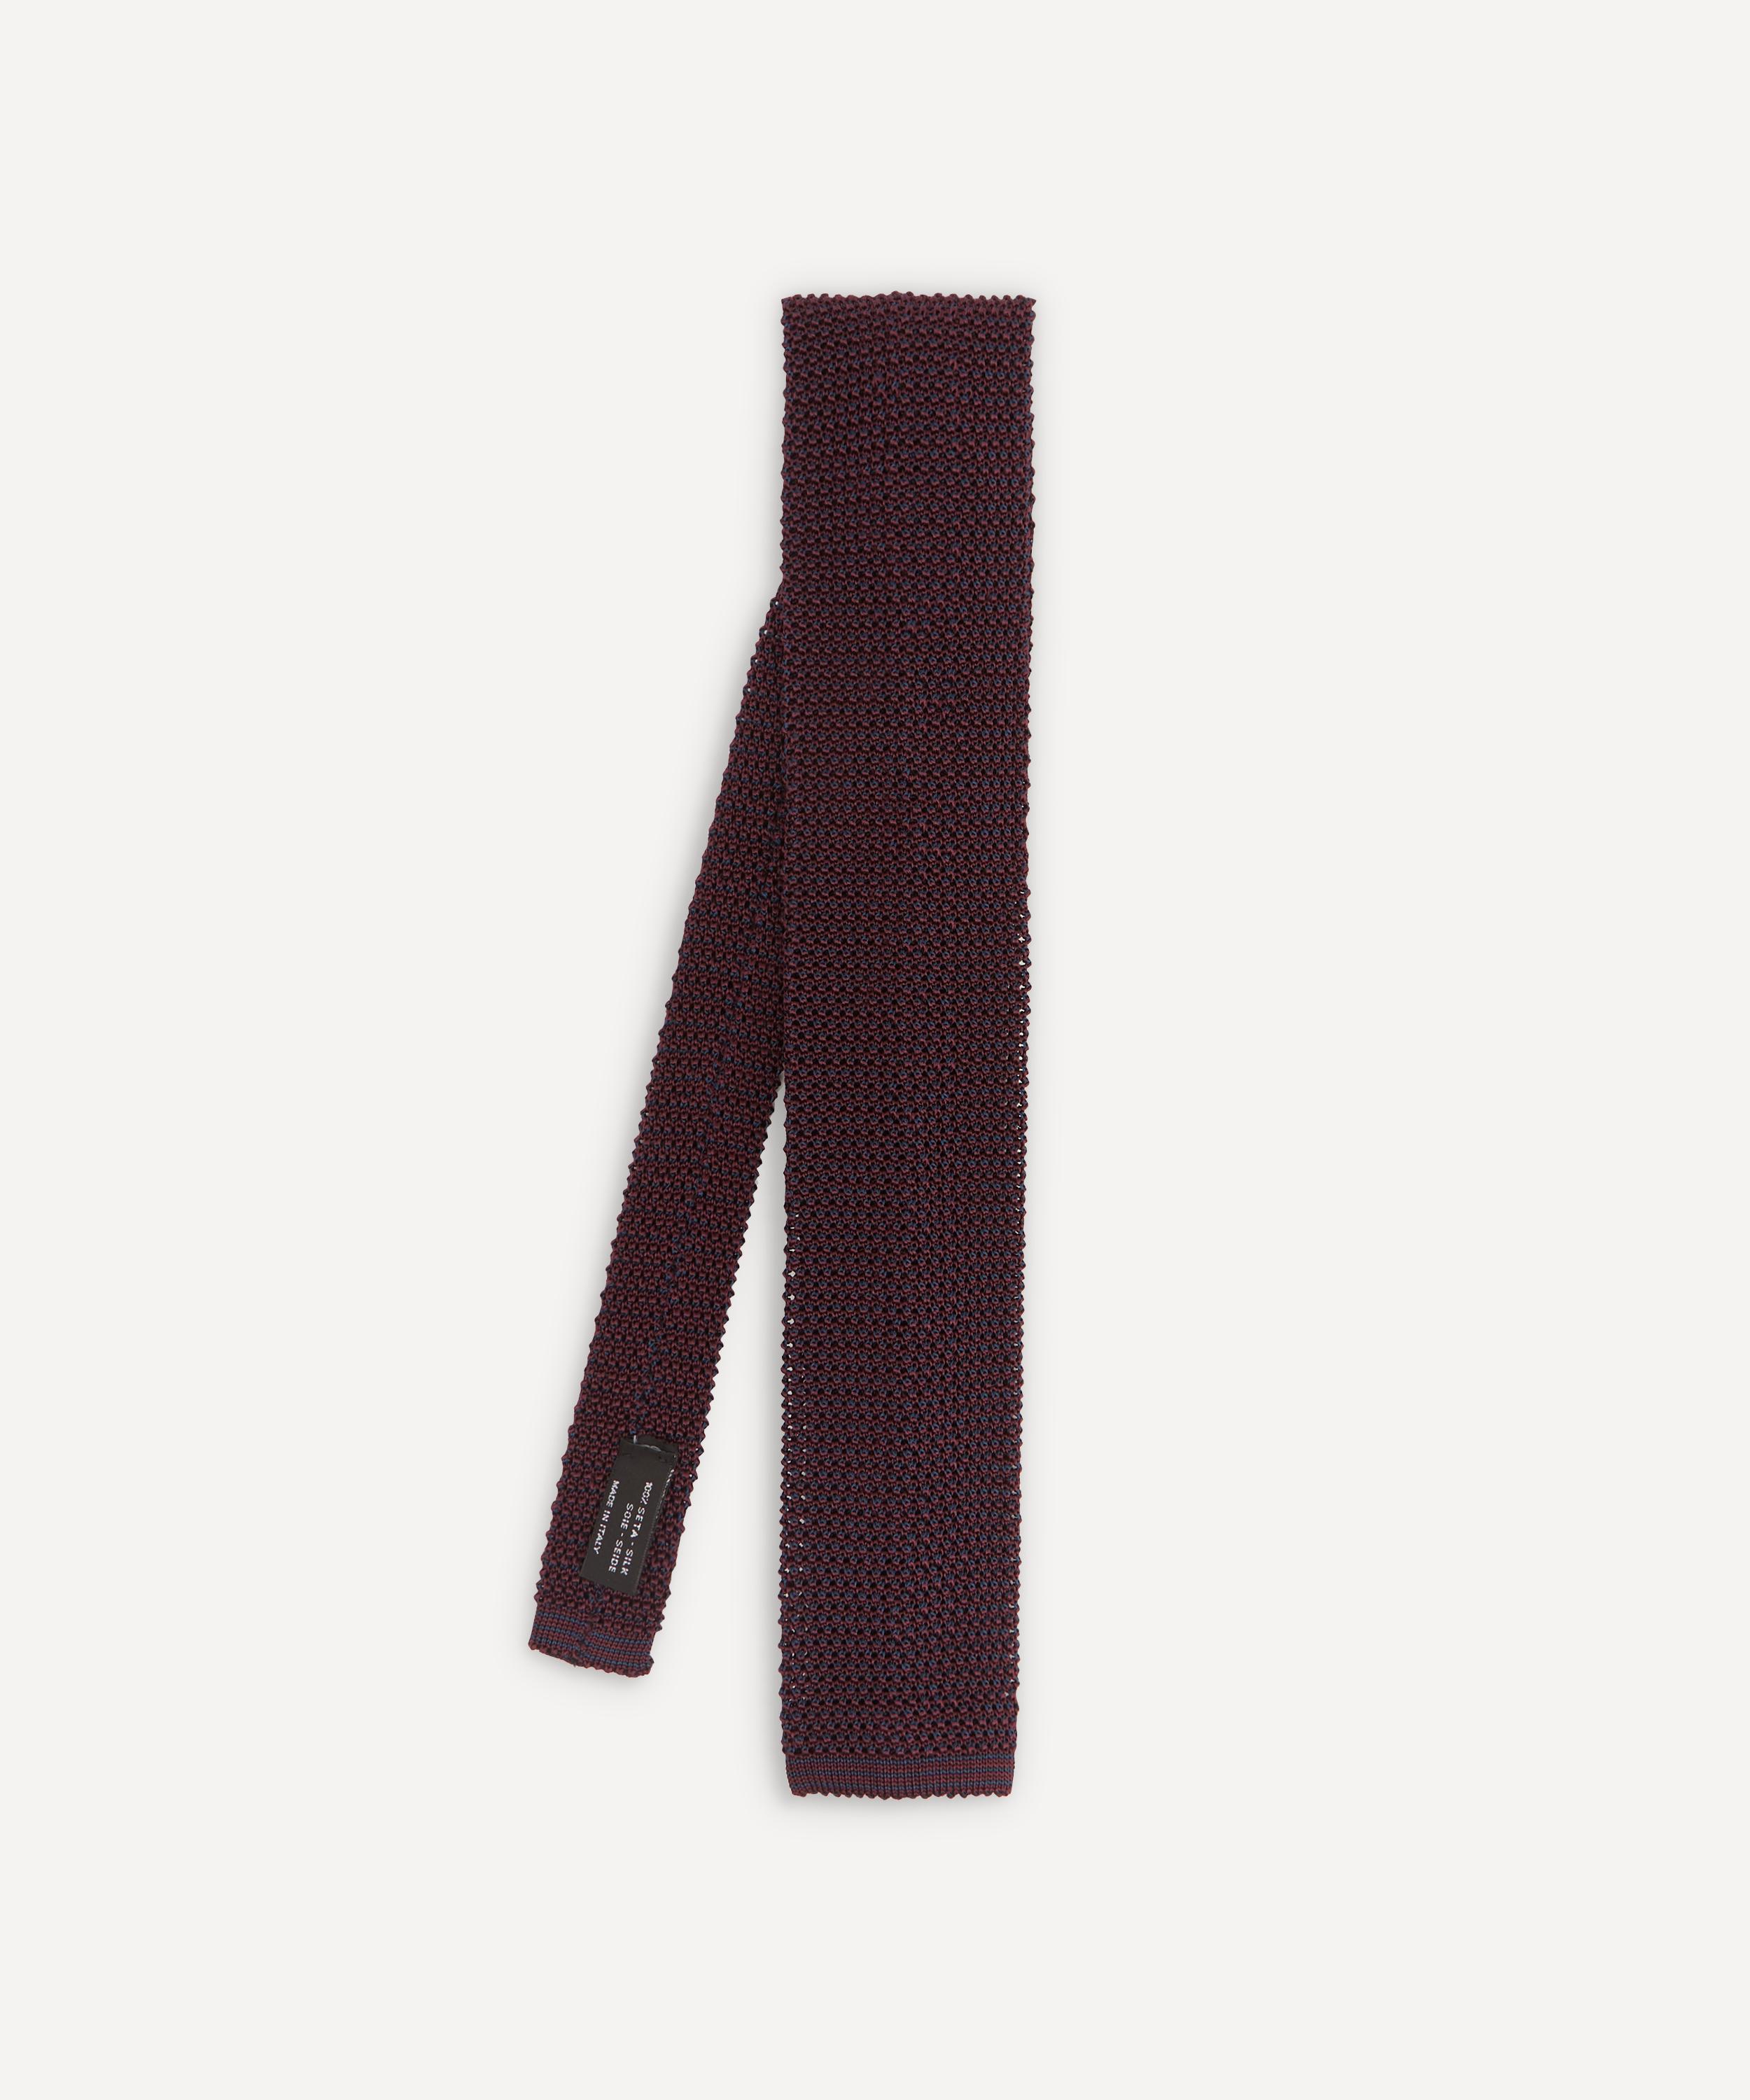 NICK BRONSON TWO-TONE KNITTED SILK TIE,000731165